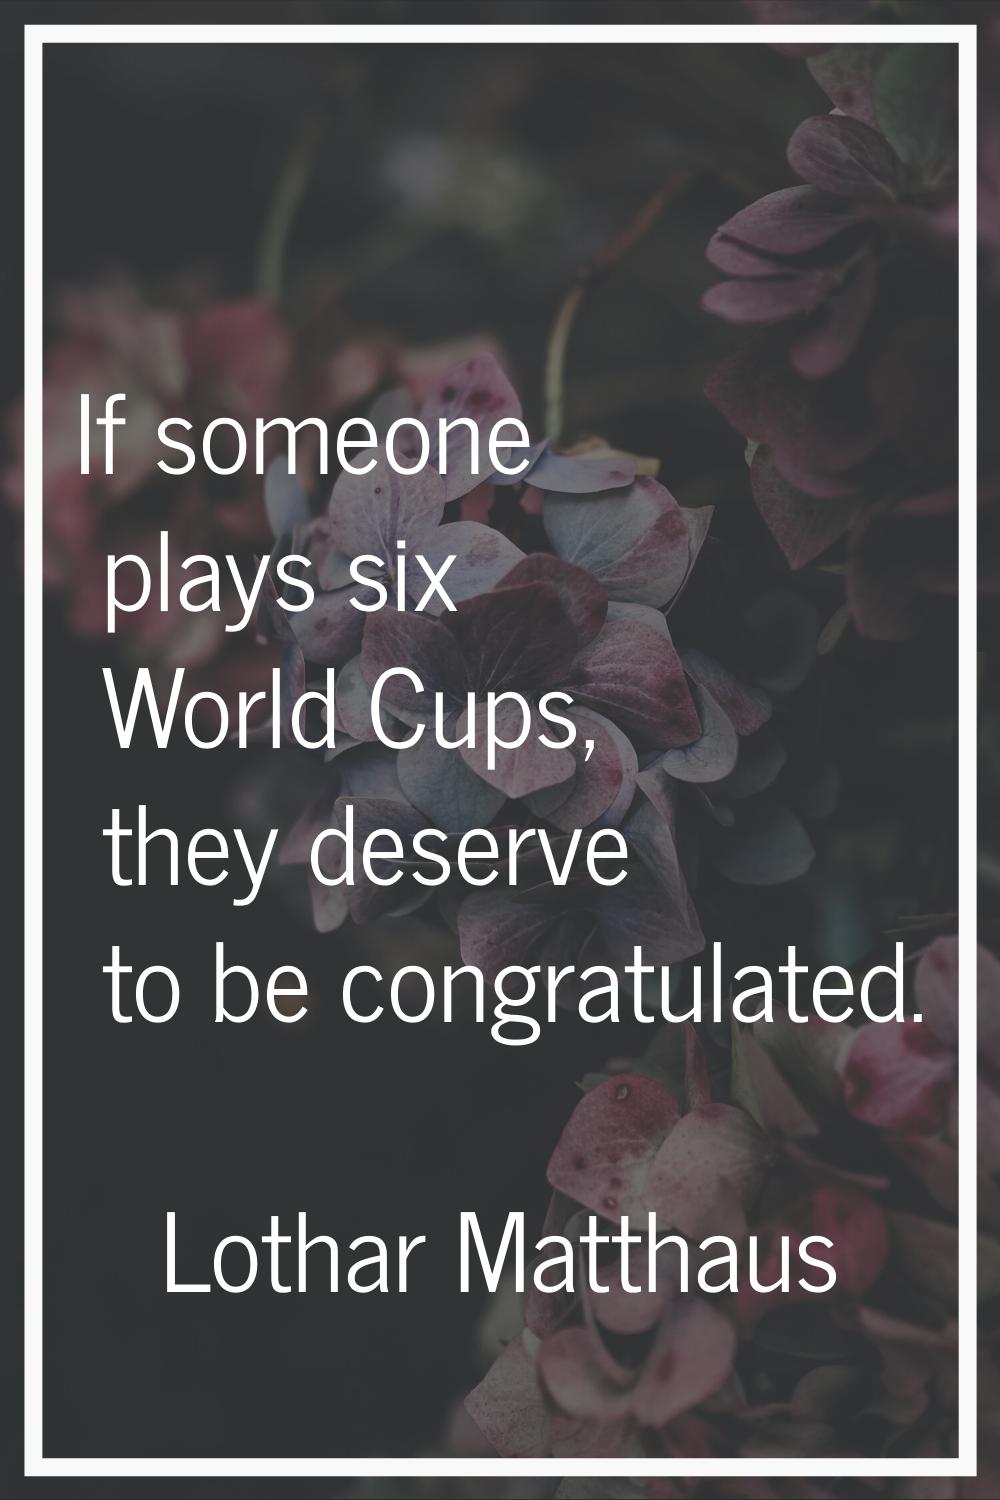 If someone plays six World Cups, they deserve to be congratulated.